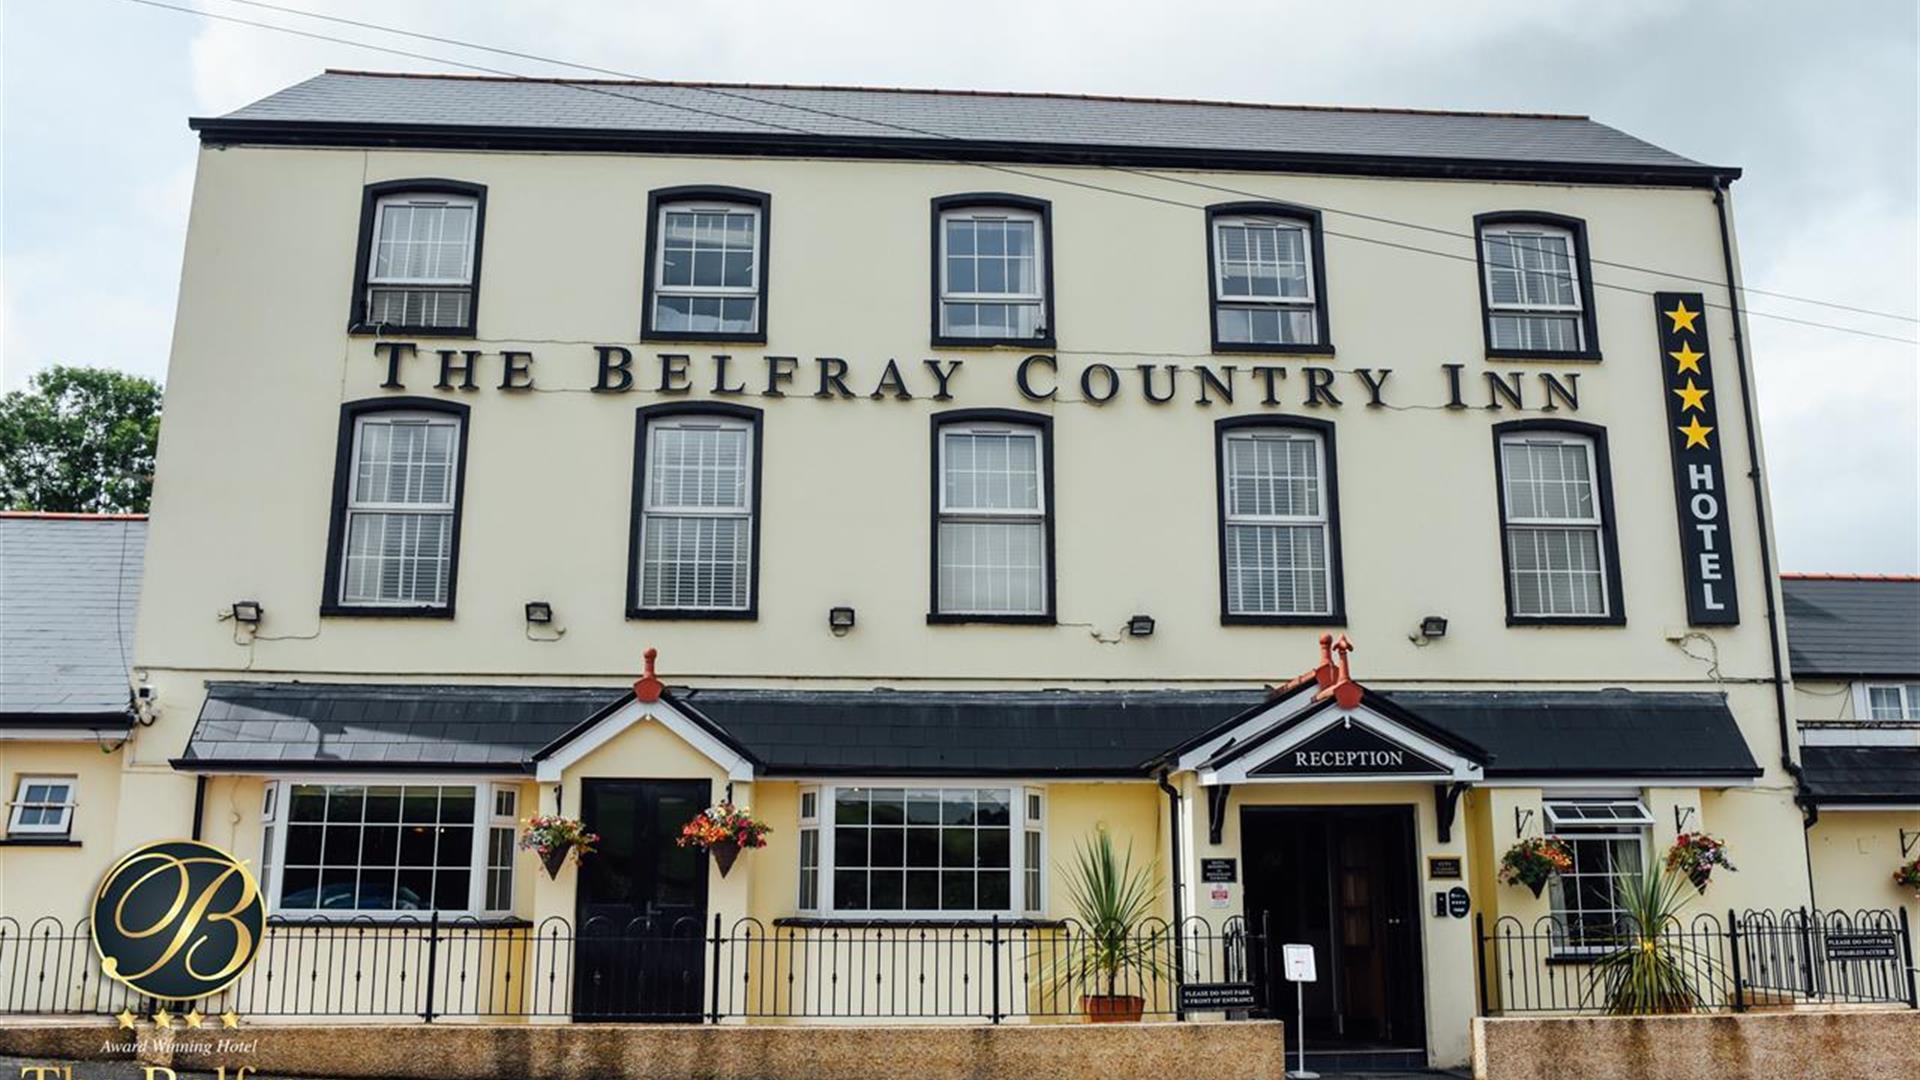 The Belfray Country Inn Hotel